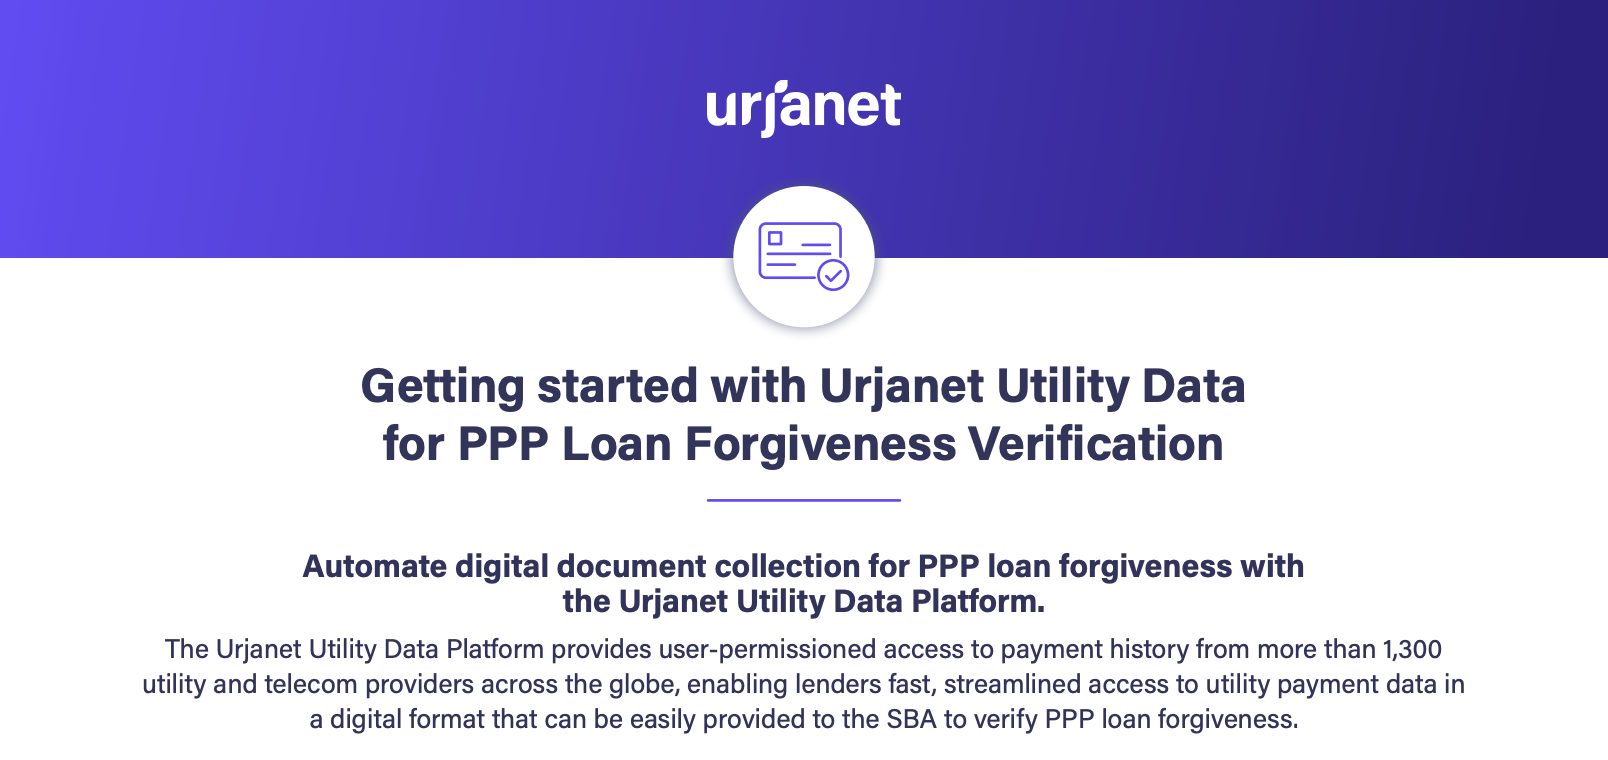 Getting Started with Urjanet Utility Data for PPP Loan Verification